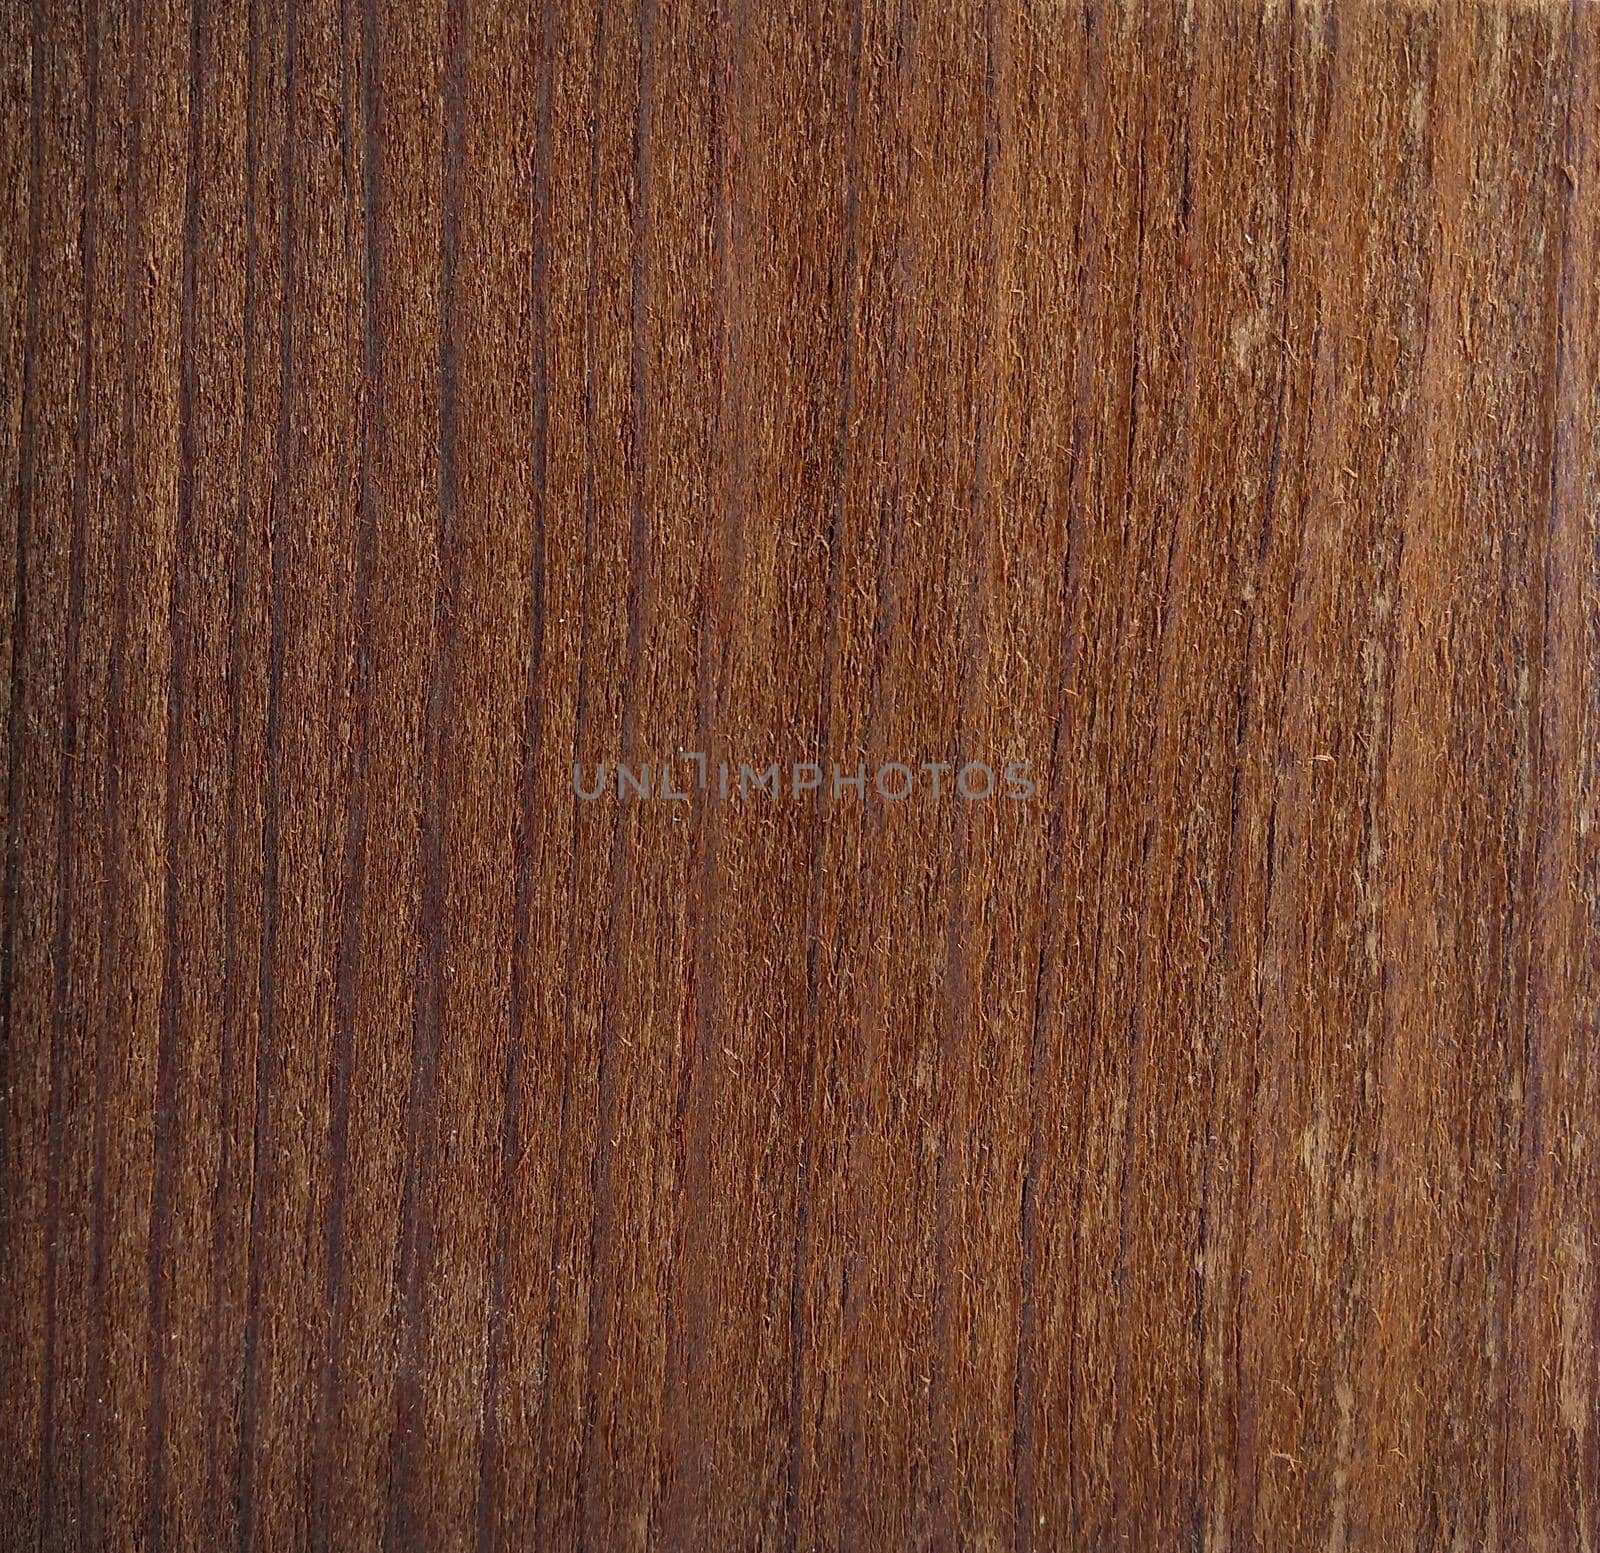 Natural Smoked larch (dark) wood texture background. Smoked larch (dark) veneer surface for interior and exterior manufacturers use.